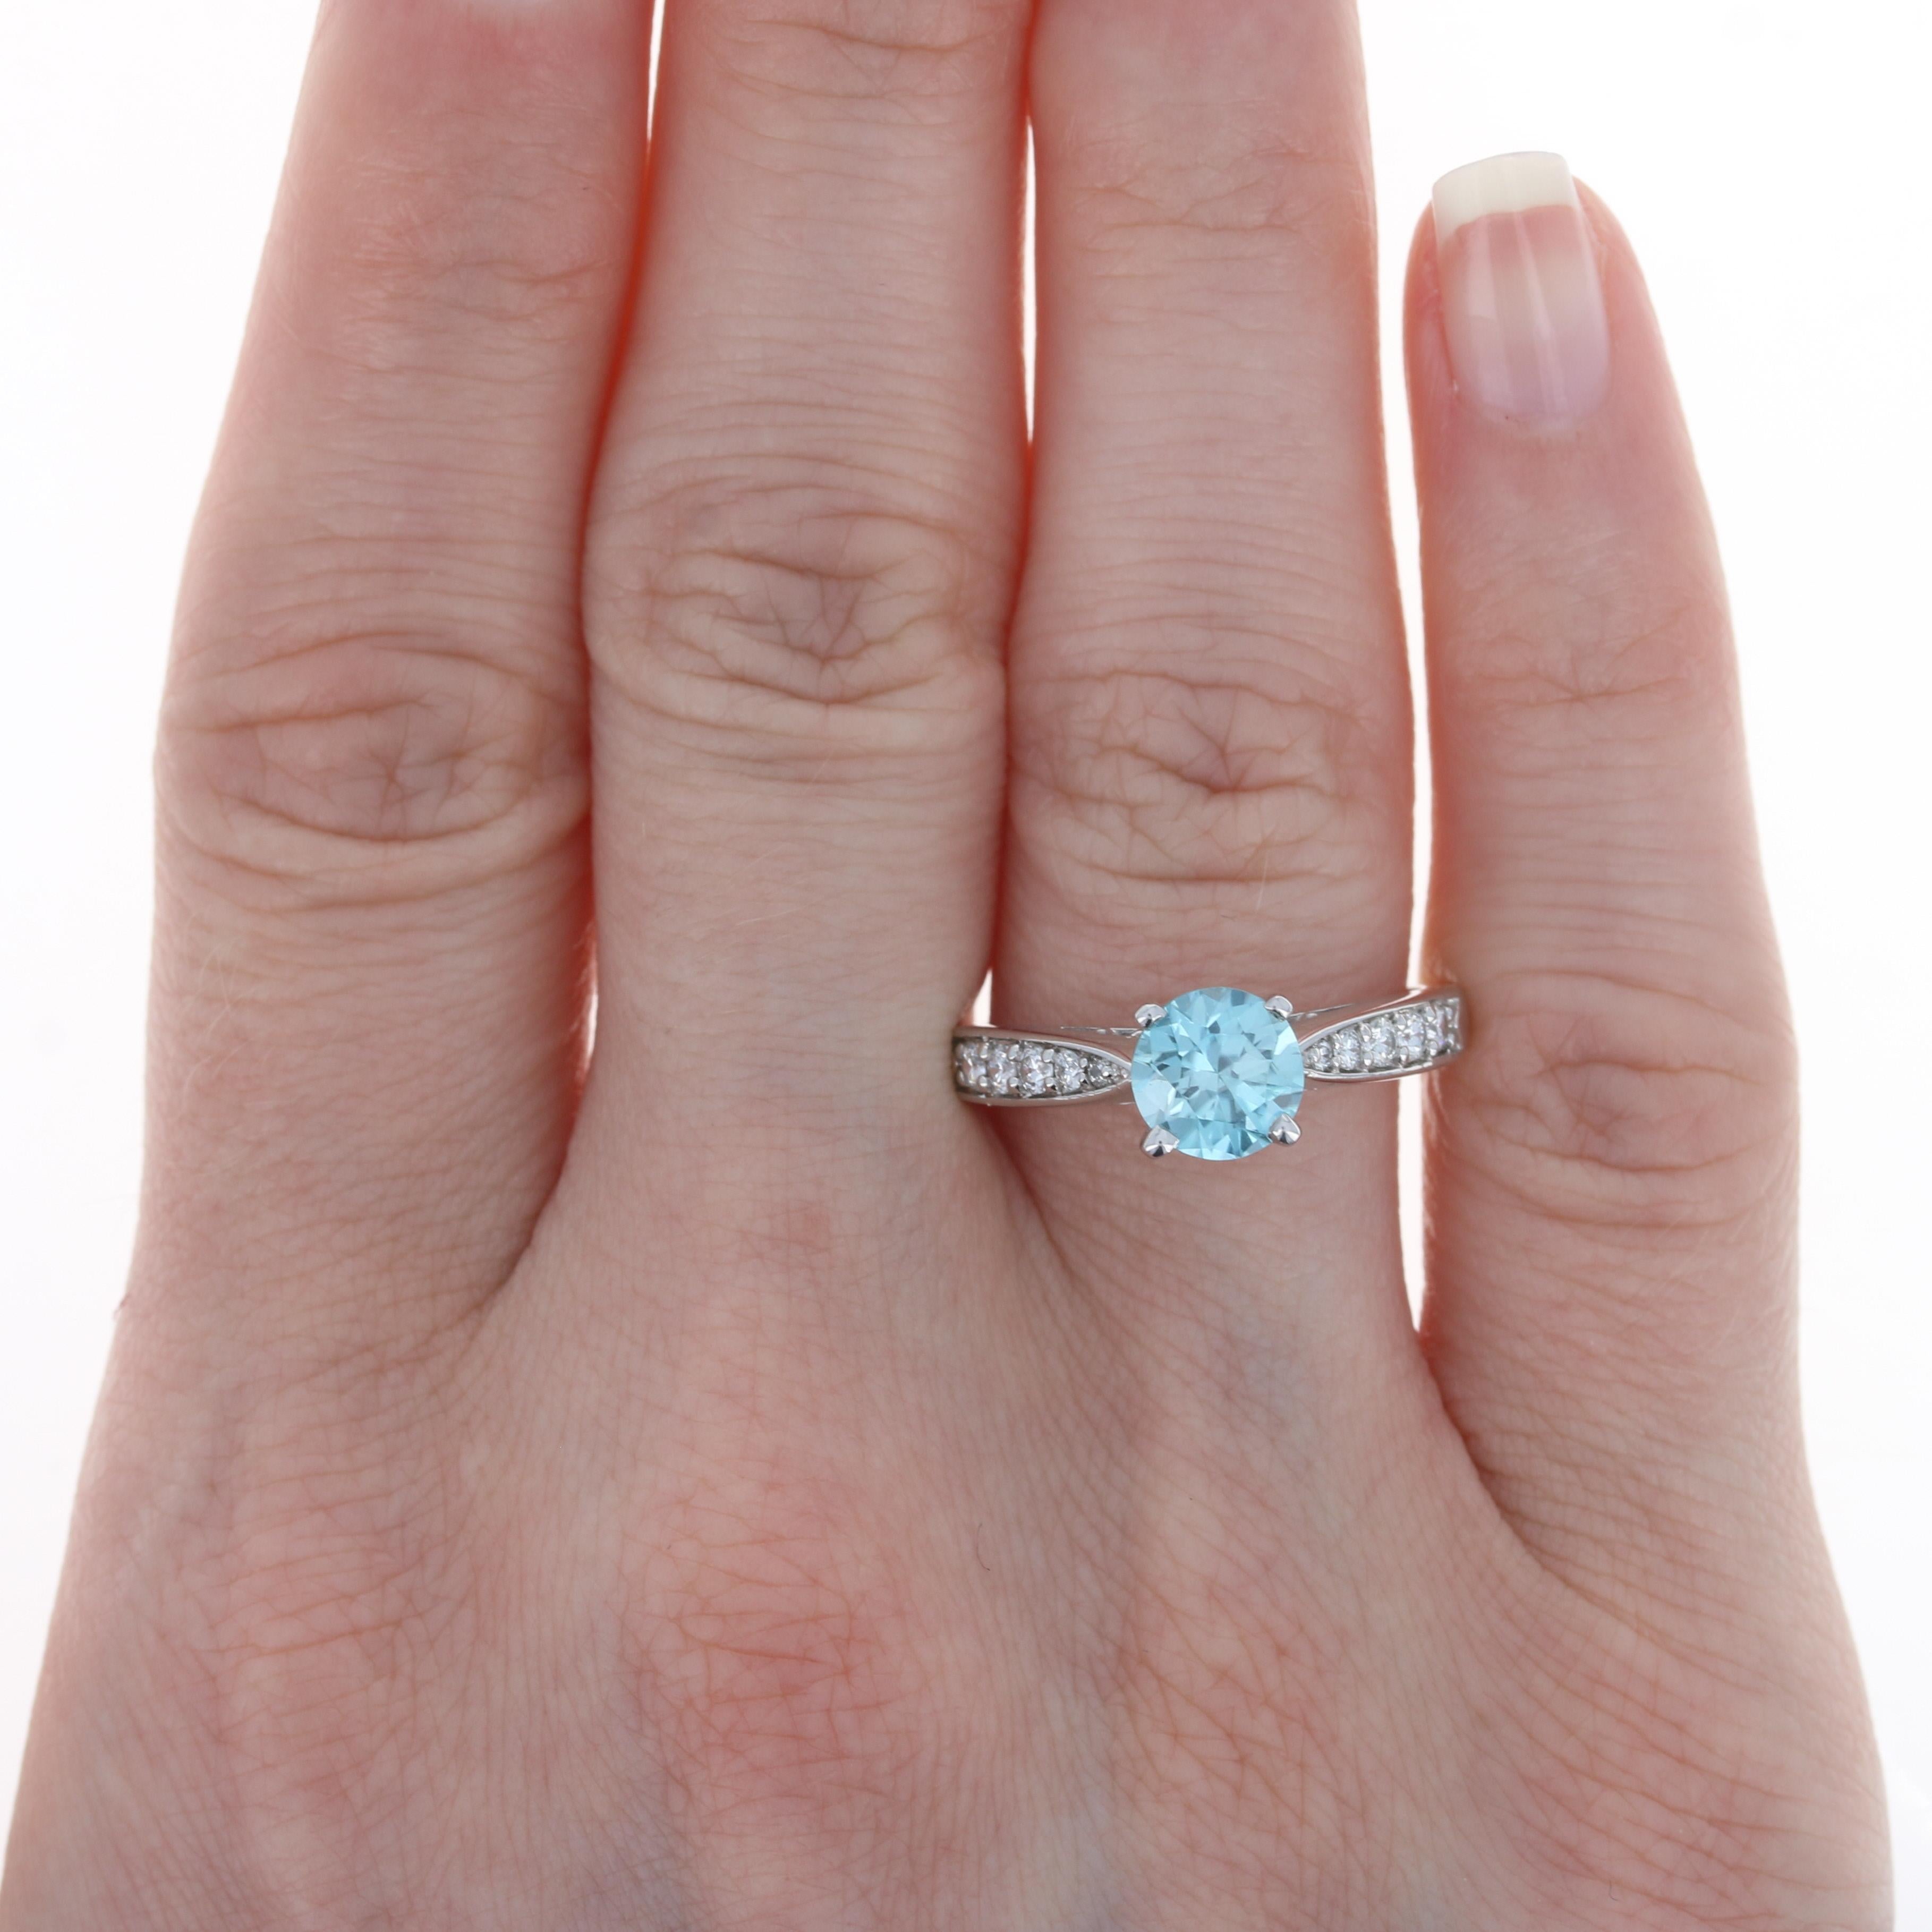 Size: 8 1/2
Sizing Fee: Up 2 sizes for $35 or Down 3 sizes for $30

Metal Content: 14k White Gold

Stone Information: 
Genuine Zircon
Carat: 2.13ct (weighed)
Cut: Round
Color: Blue
Diameter: 7mm 

Natural Diamonds
Carats: .30ctw
Cut: Round